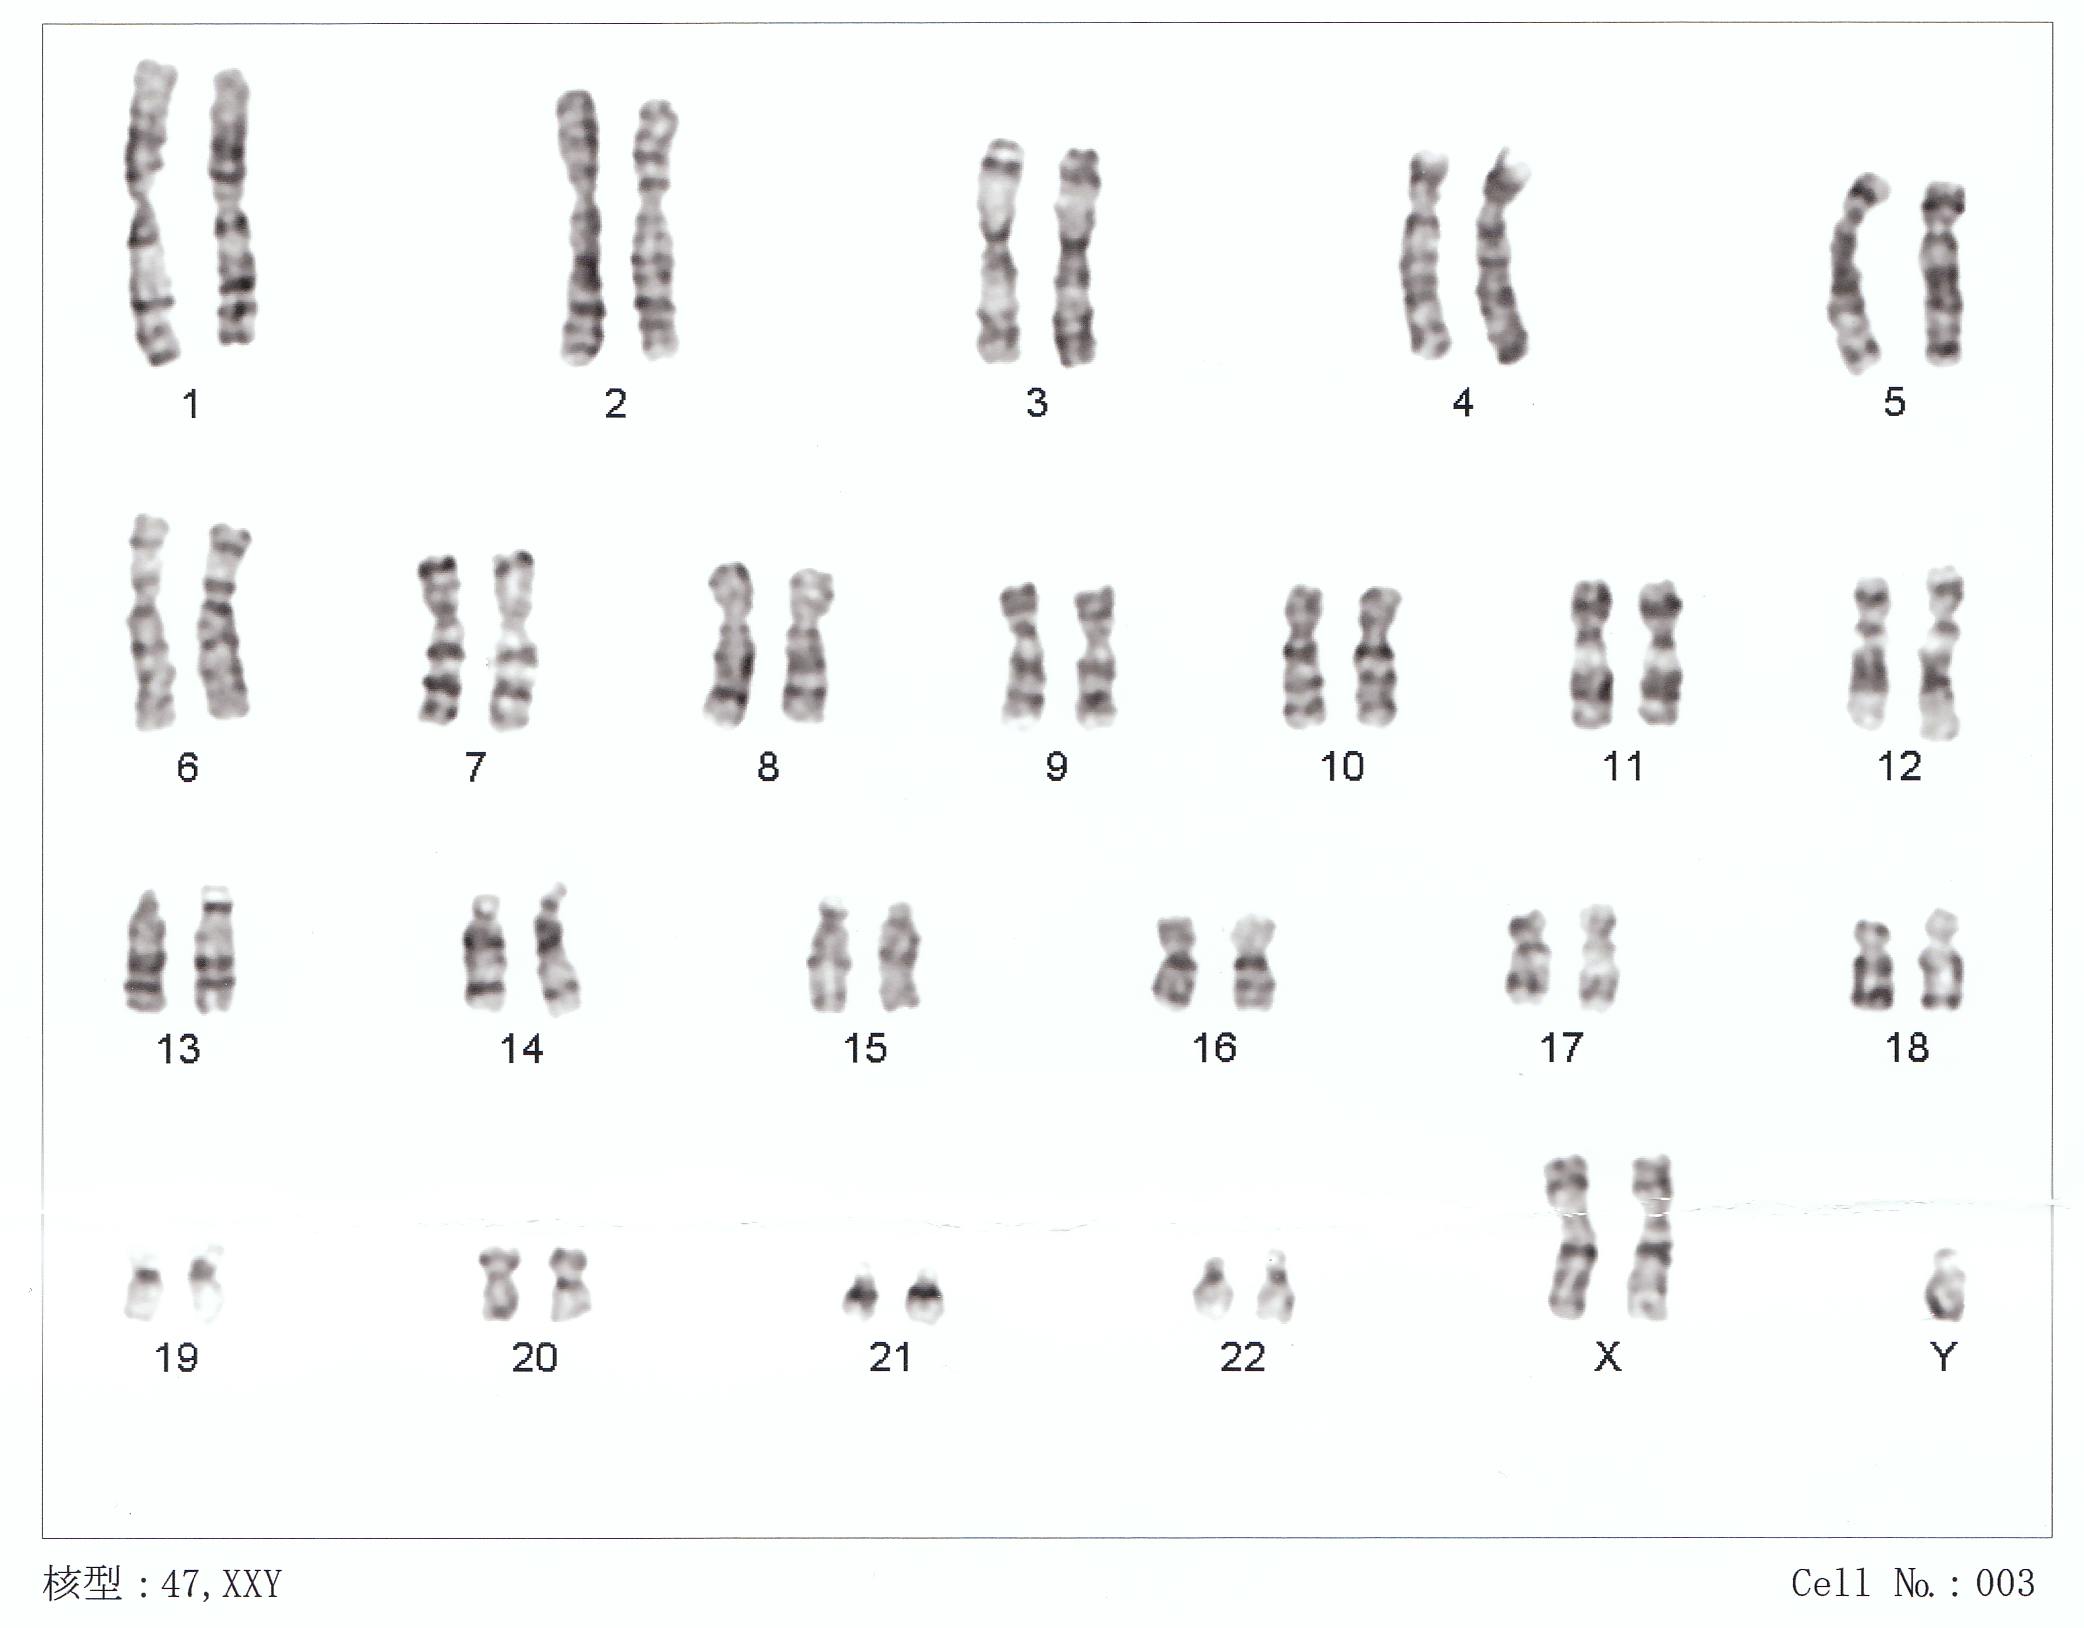 The chromosomes of a person with XXY, often called Klinefelter syndrome Photo: Wikimedia Commons